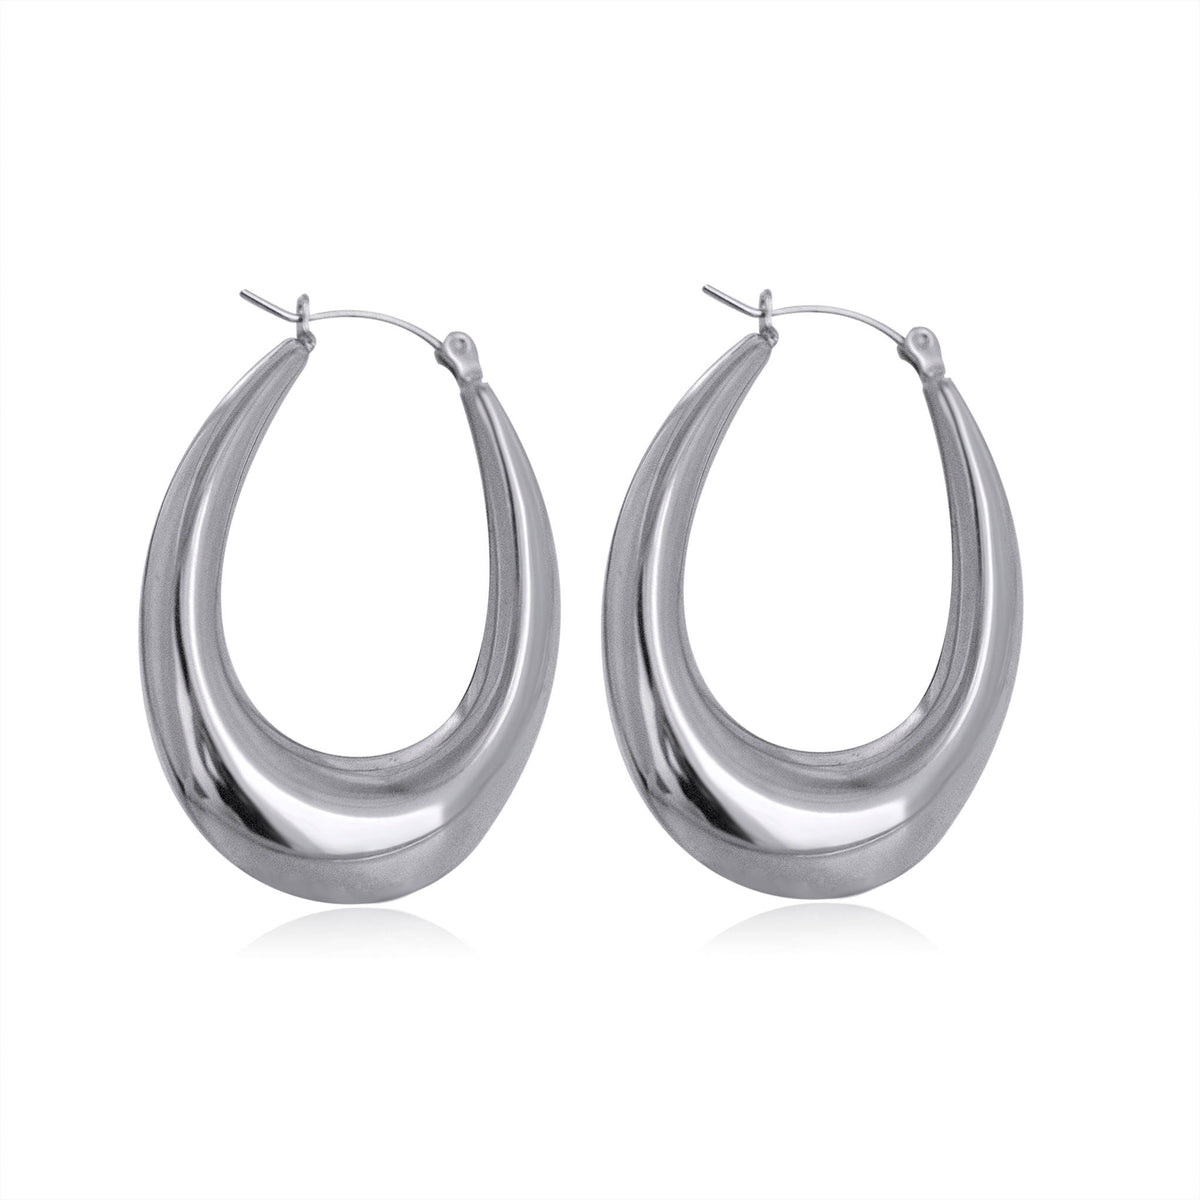 





Make a bold style statement with our large Delta Hoops.
These stunning accessories are designed to add an instant dose of glamour and confidence to your look.
